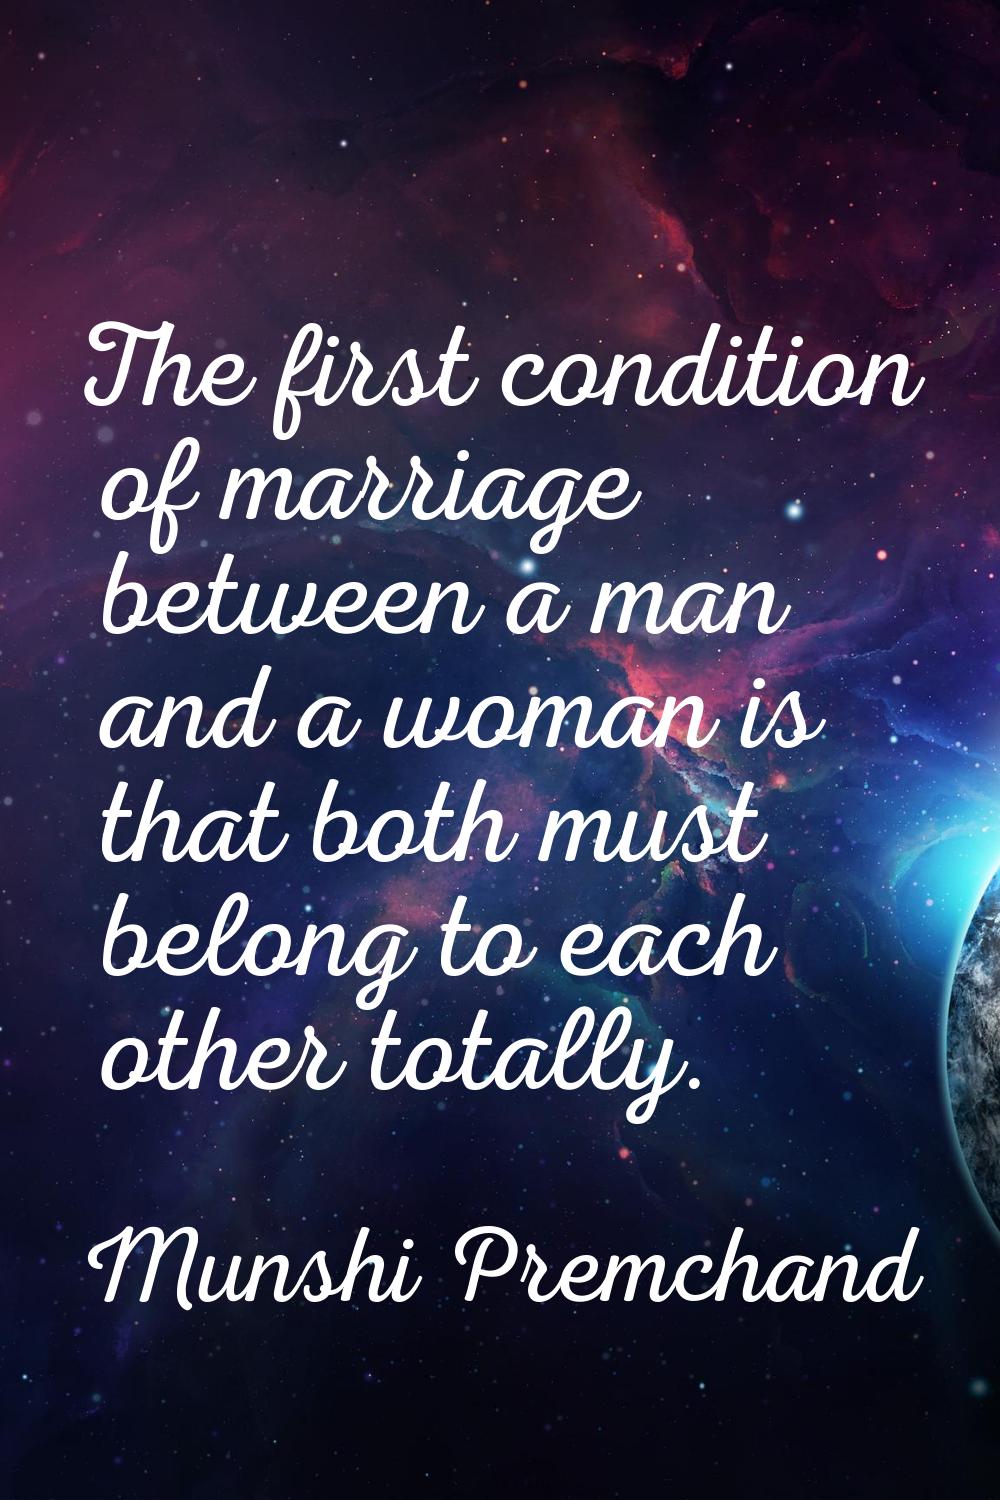 The first condition of marriage between a man and a woman is that both must belong to each other to